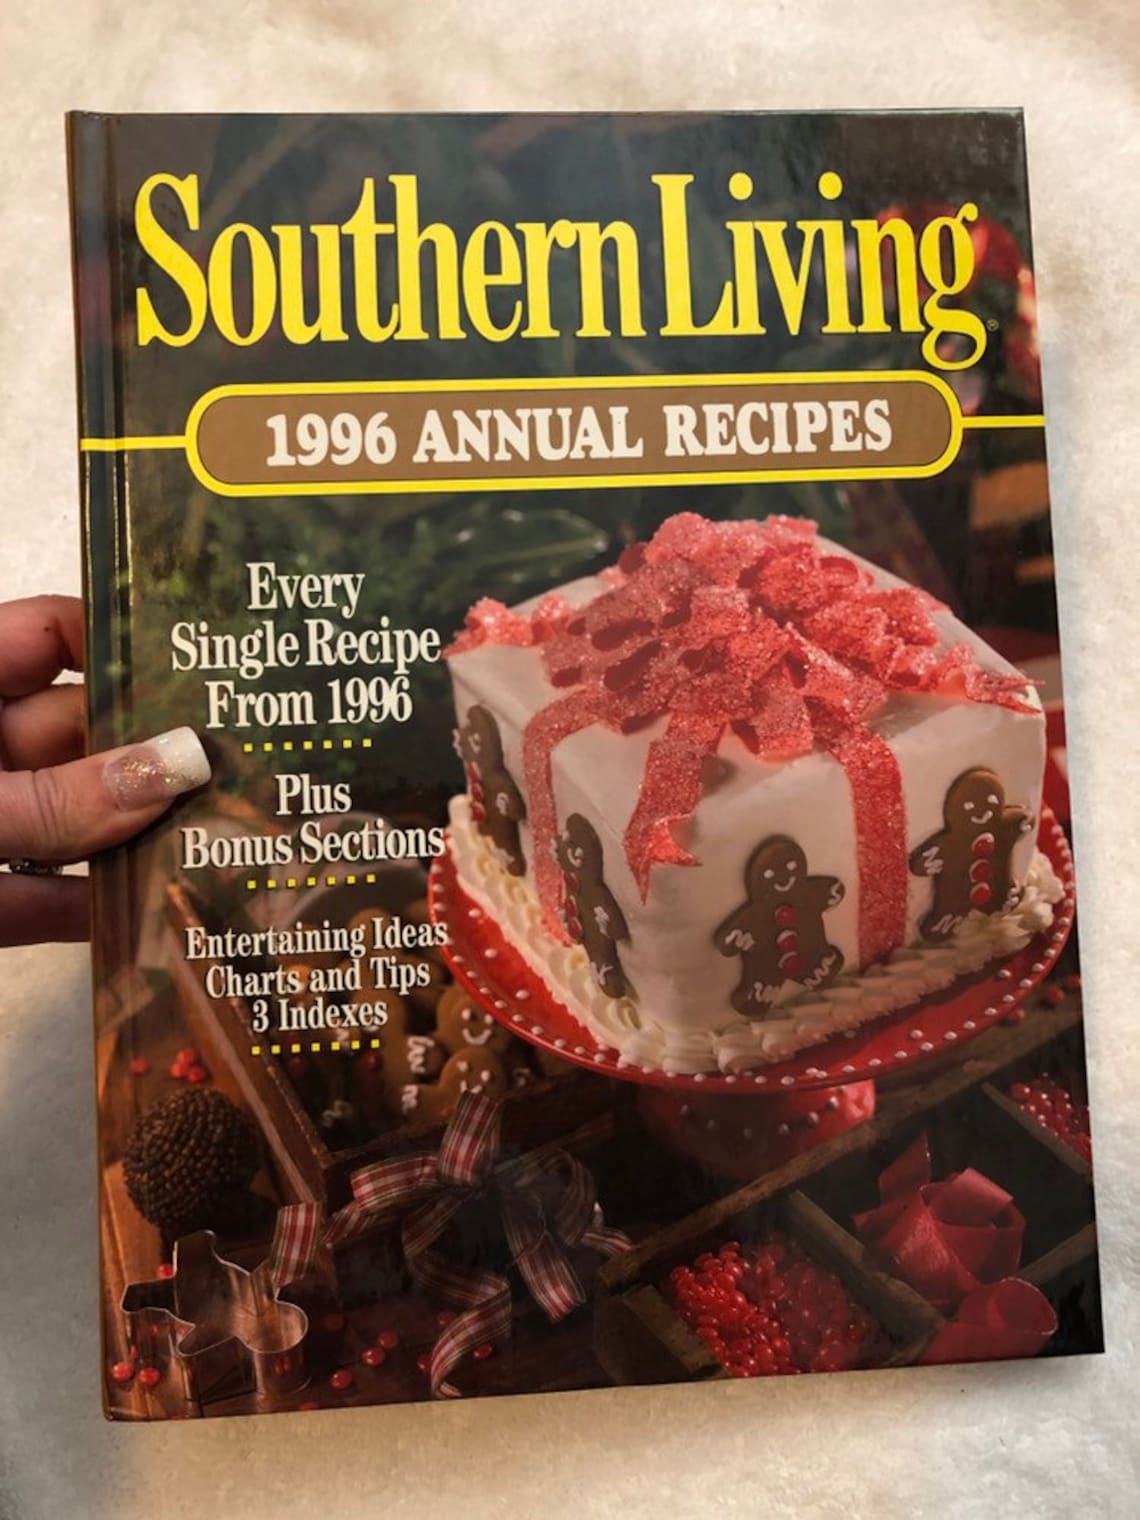 Southern Living 1996 Annual Recipes | Etsy